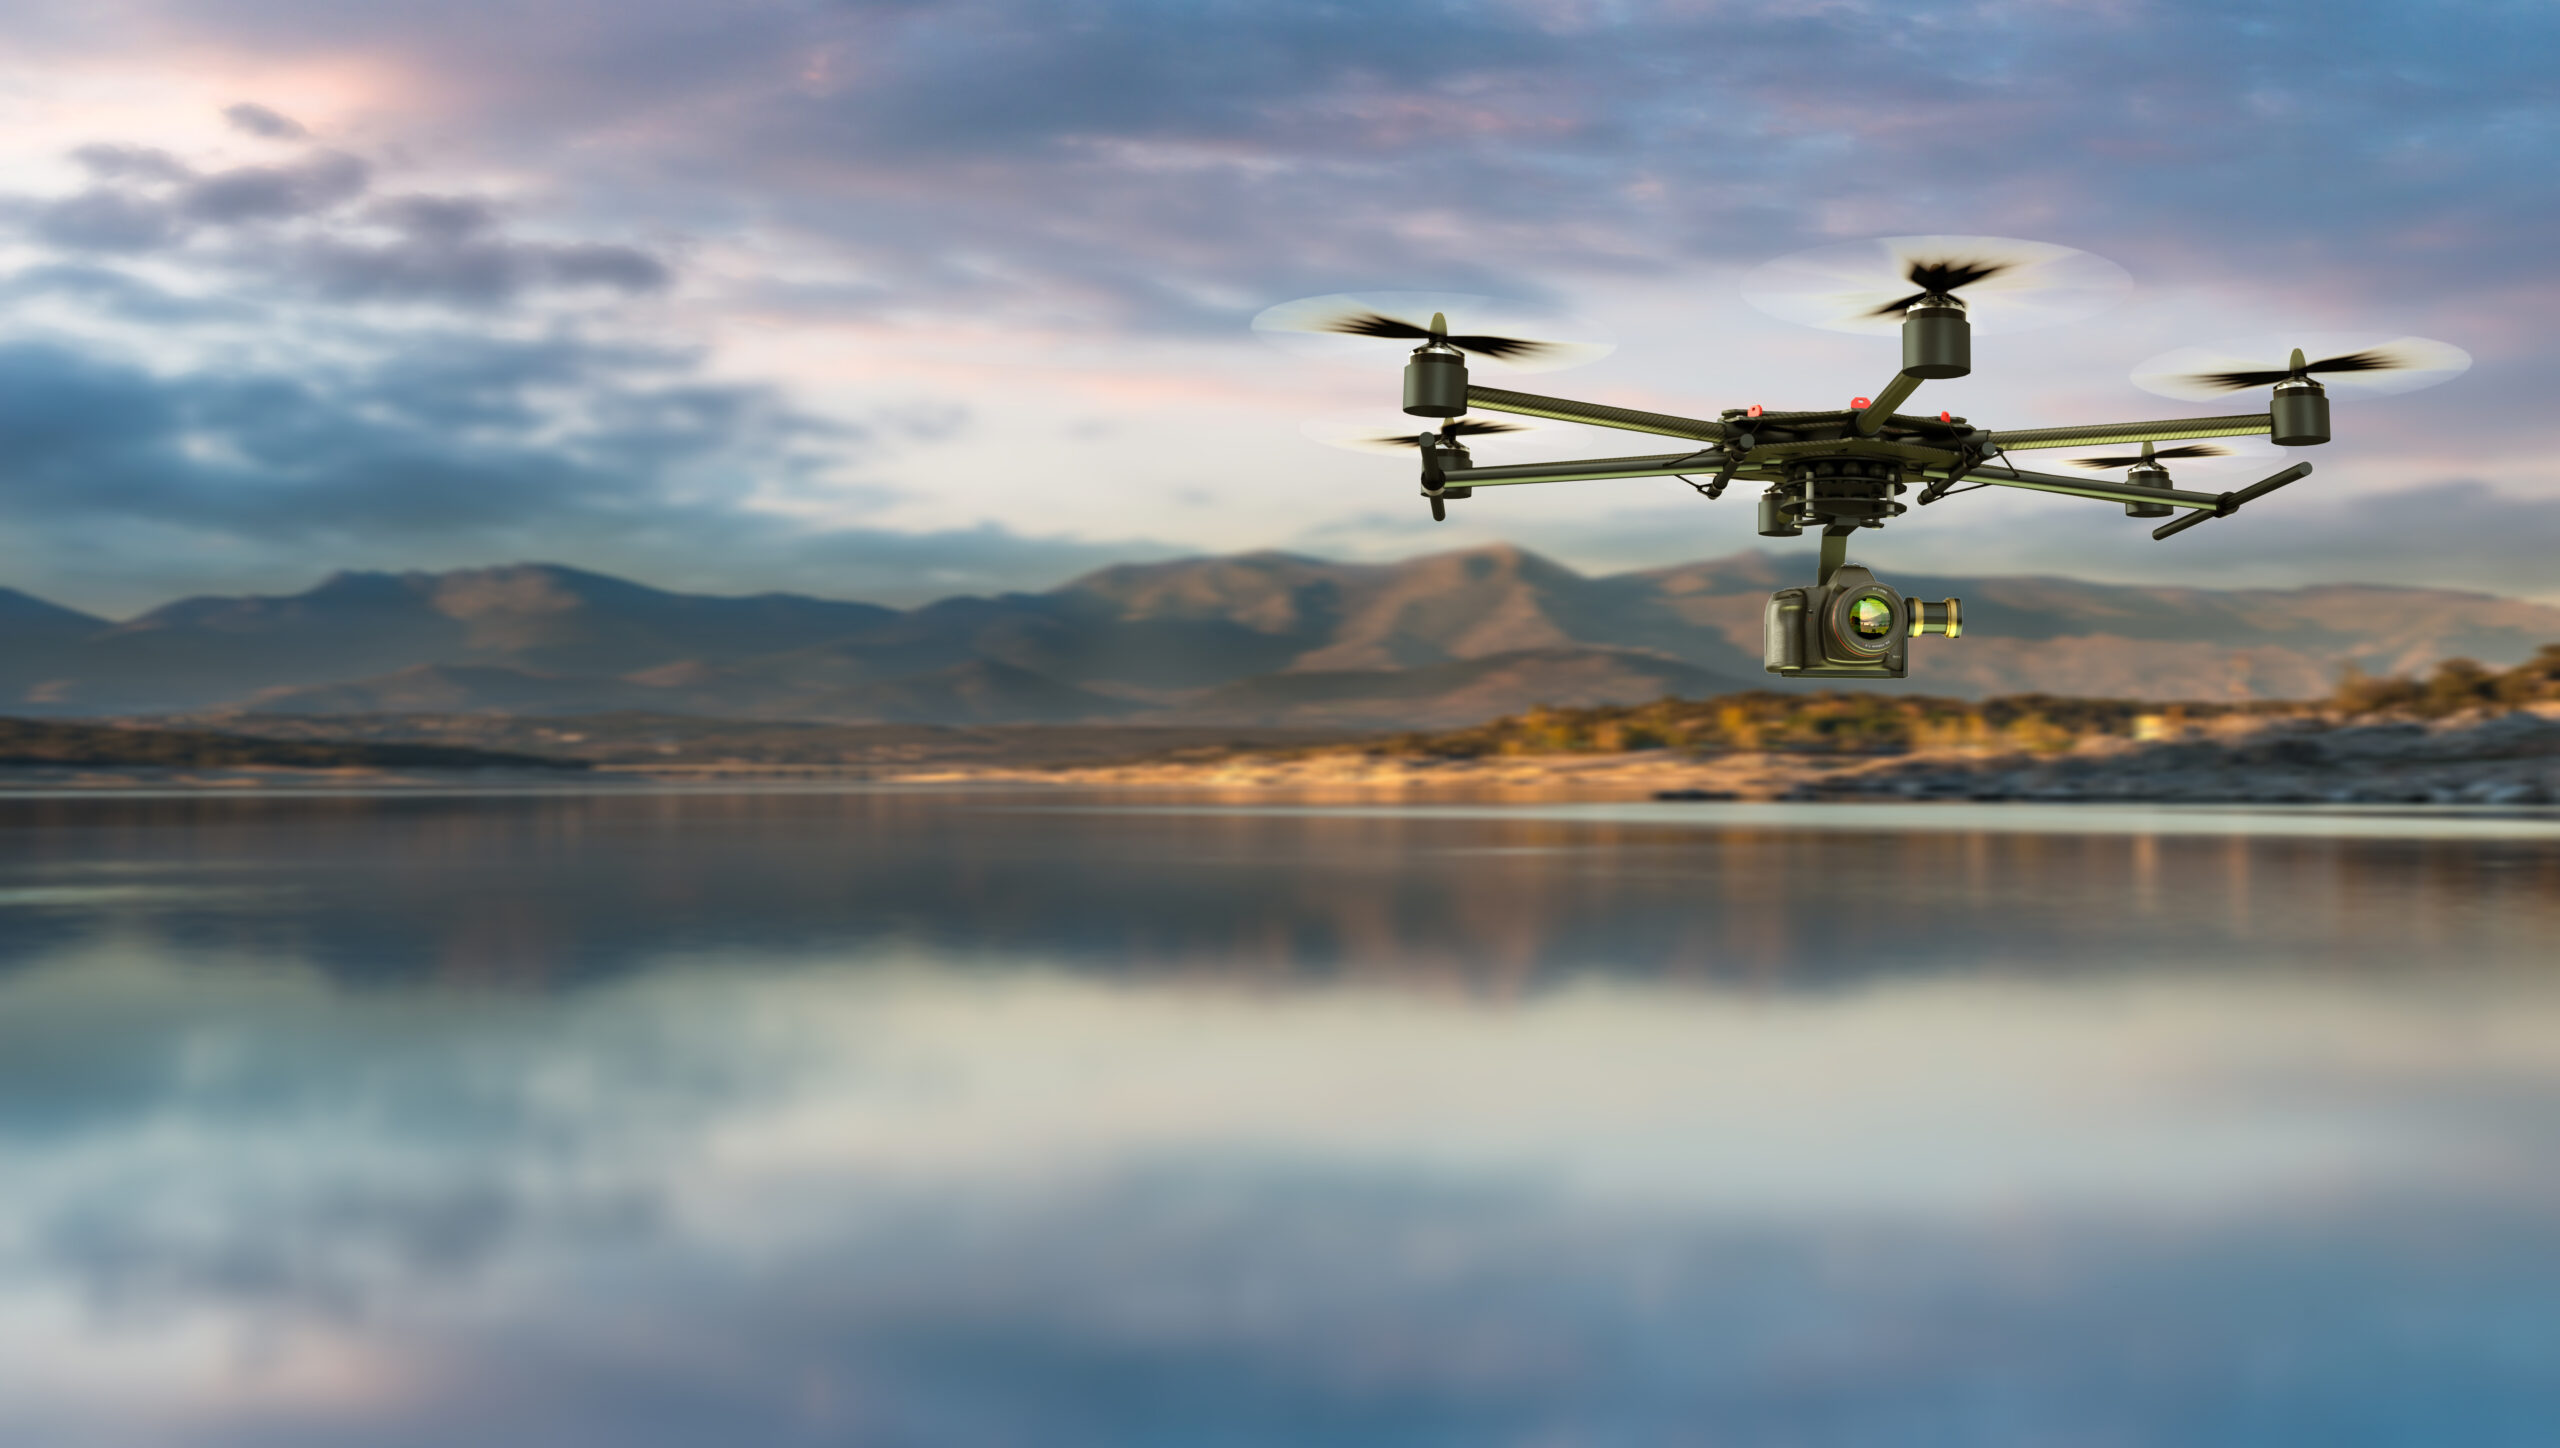 The Unmanned Aerial Systems Flight and Payload Challenge